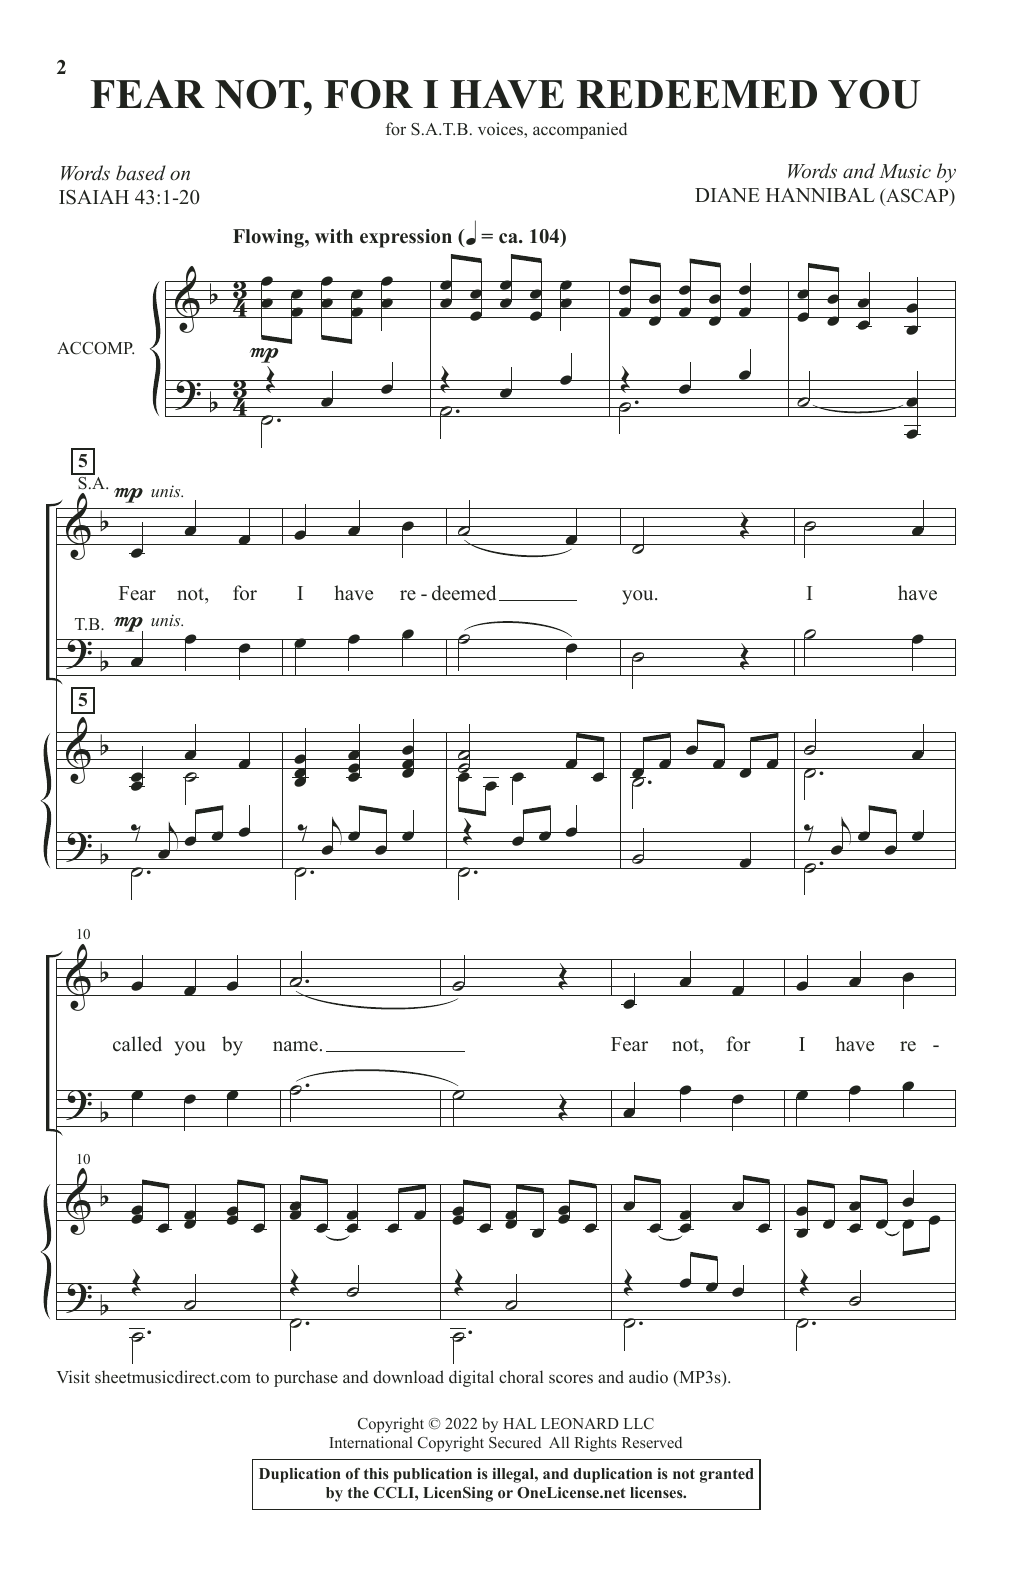 Download Diane Hannibal Fear Not, For I Have Redeemed You Sheet Music